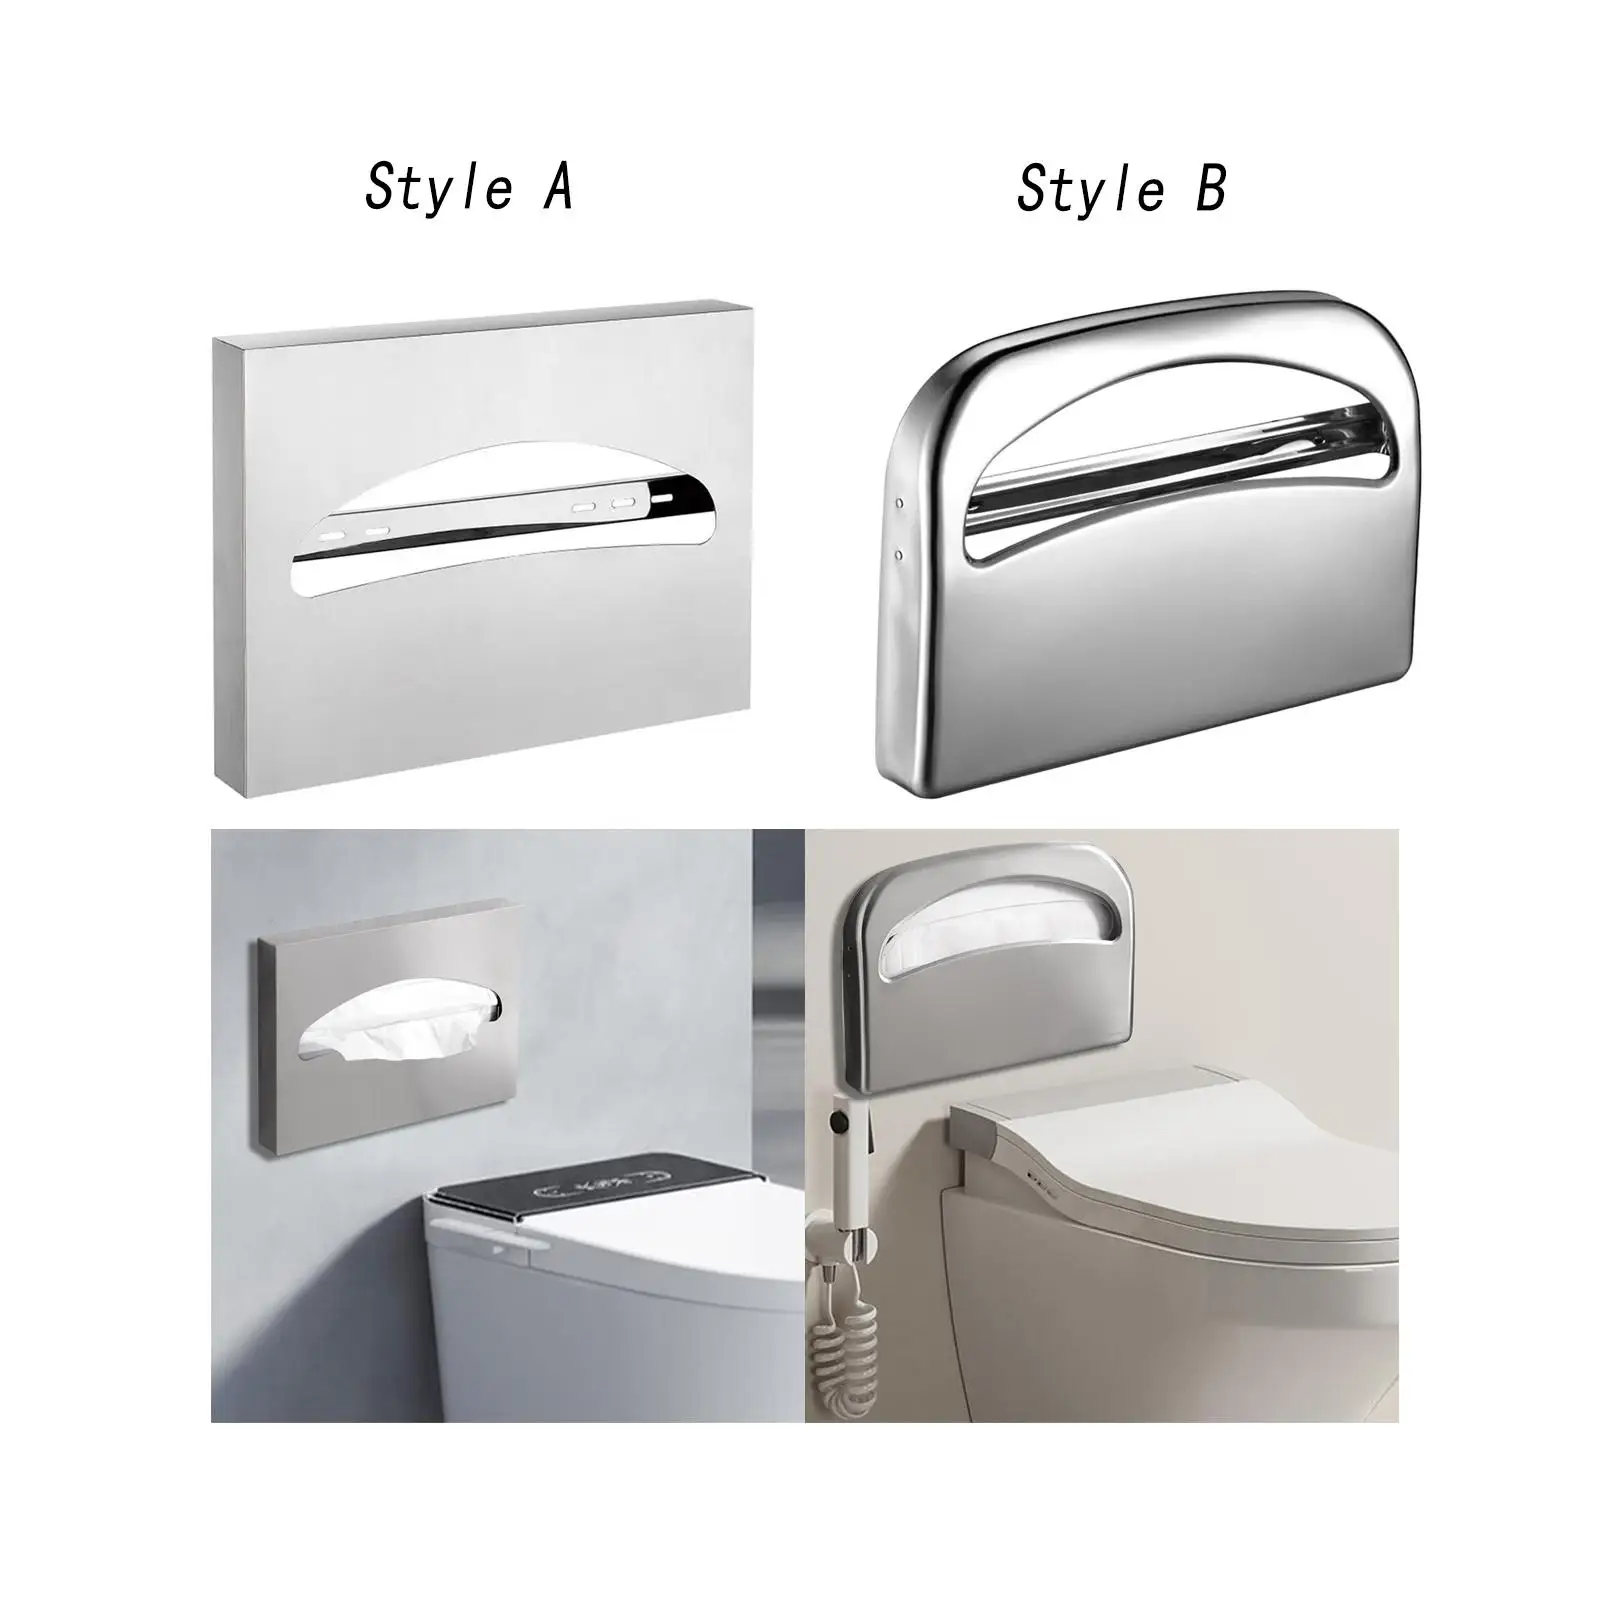 Toilet Seat Covers Dispenser with Screws Durable Heavy Duty Toilet Seat Cover Holder for Commercial Bathroom Office Restaurants